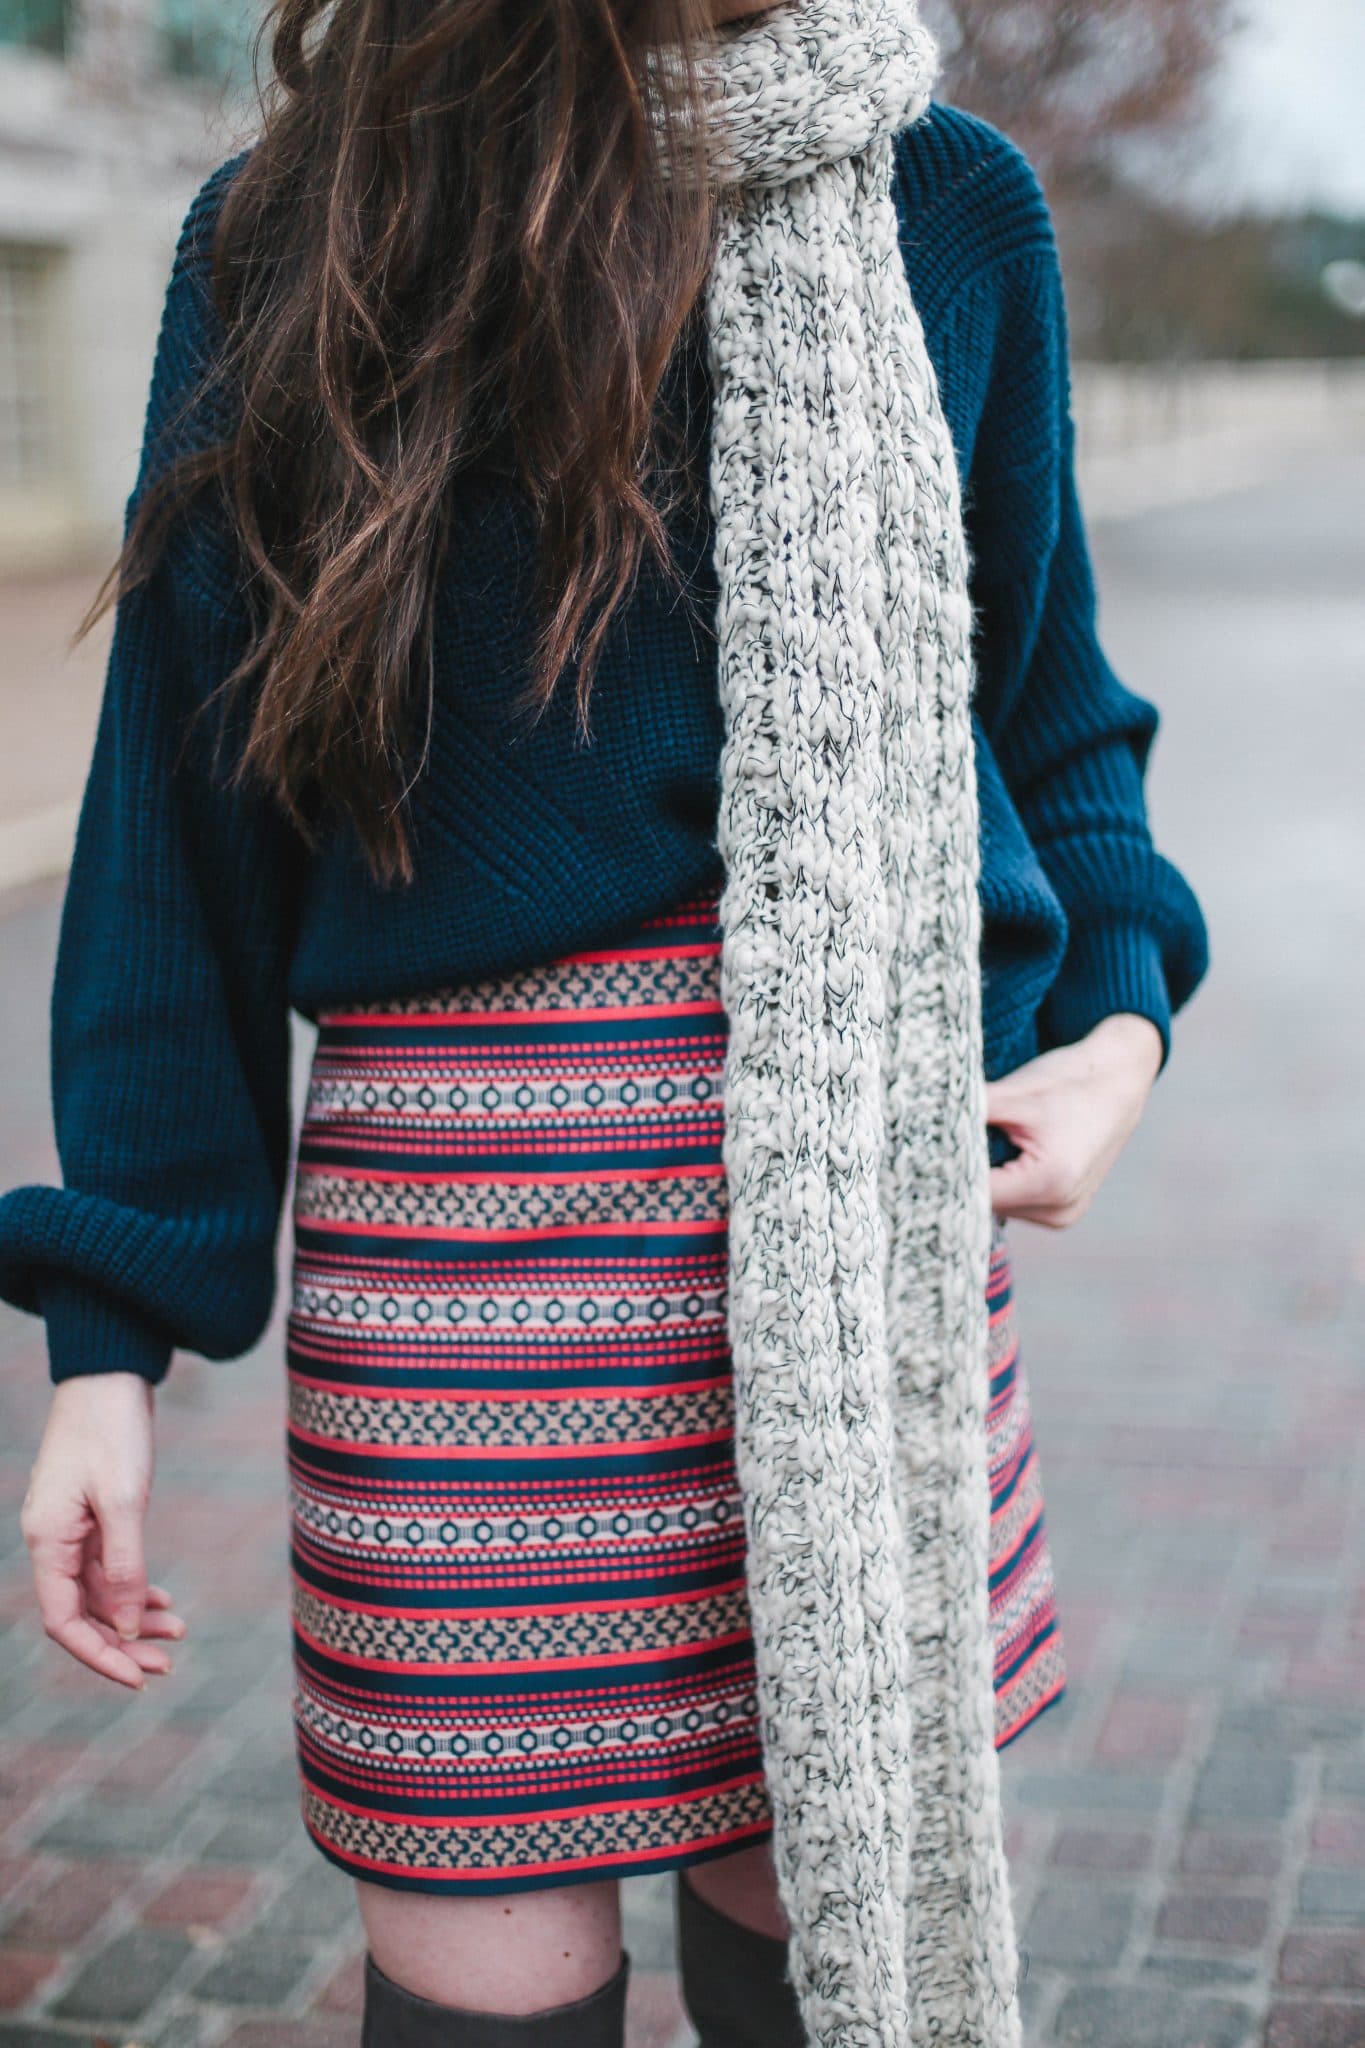 chunky knit scarf, express scarves, loft striped skirt, pretty in the pines blog, north carolina blogger, topshop navy sweater nordstrom, grey suede over the knee boots